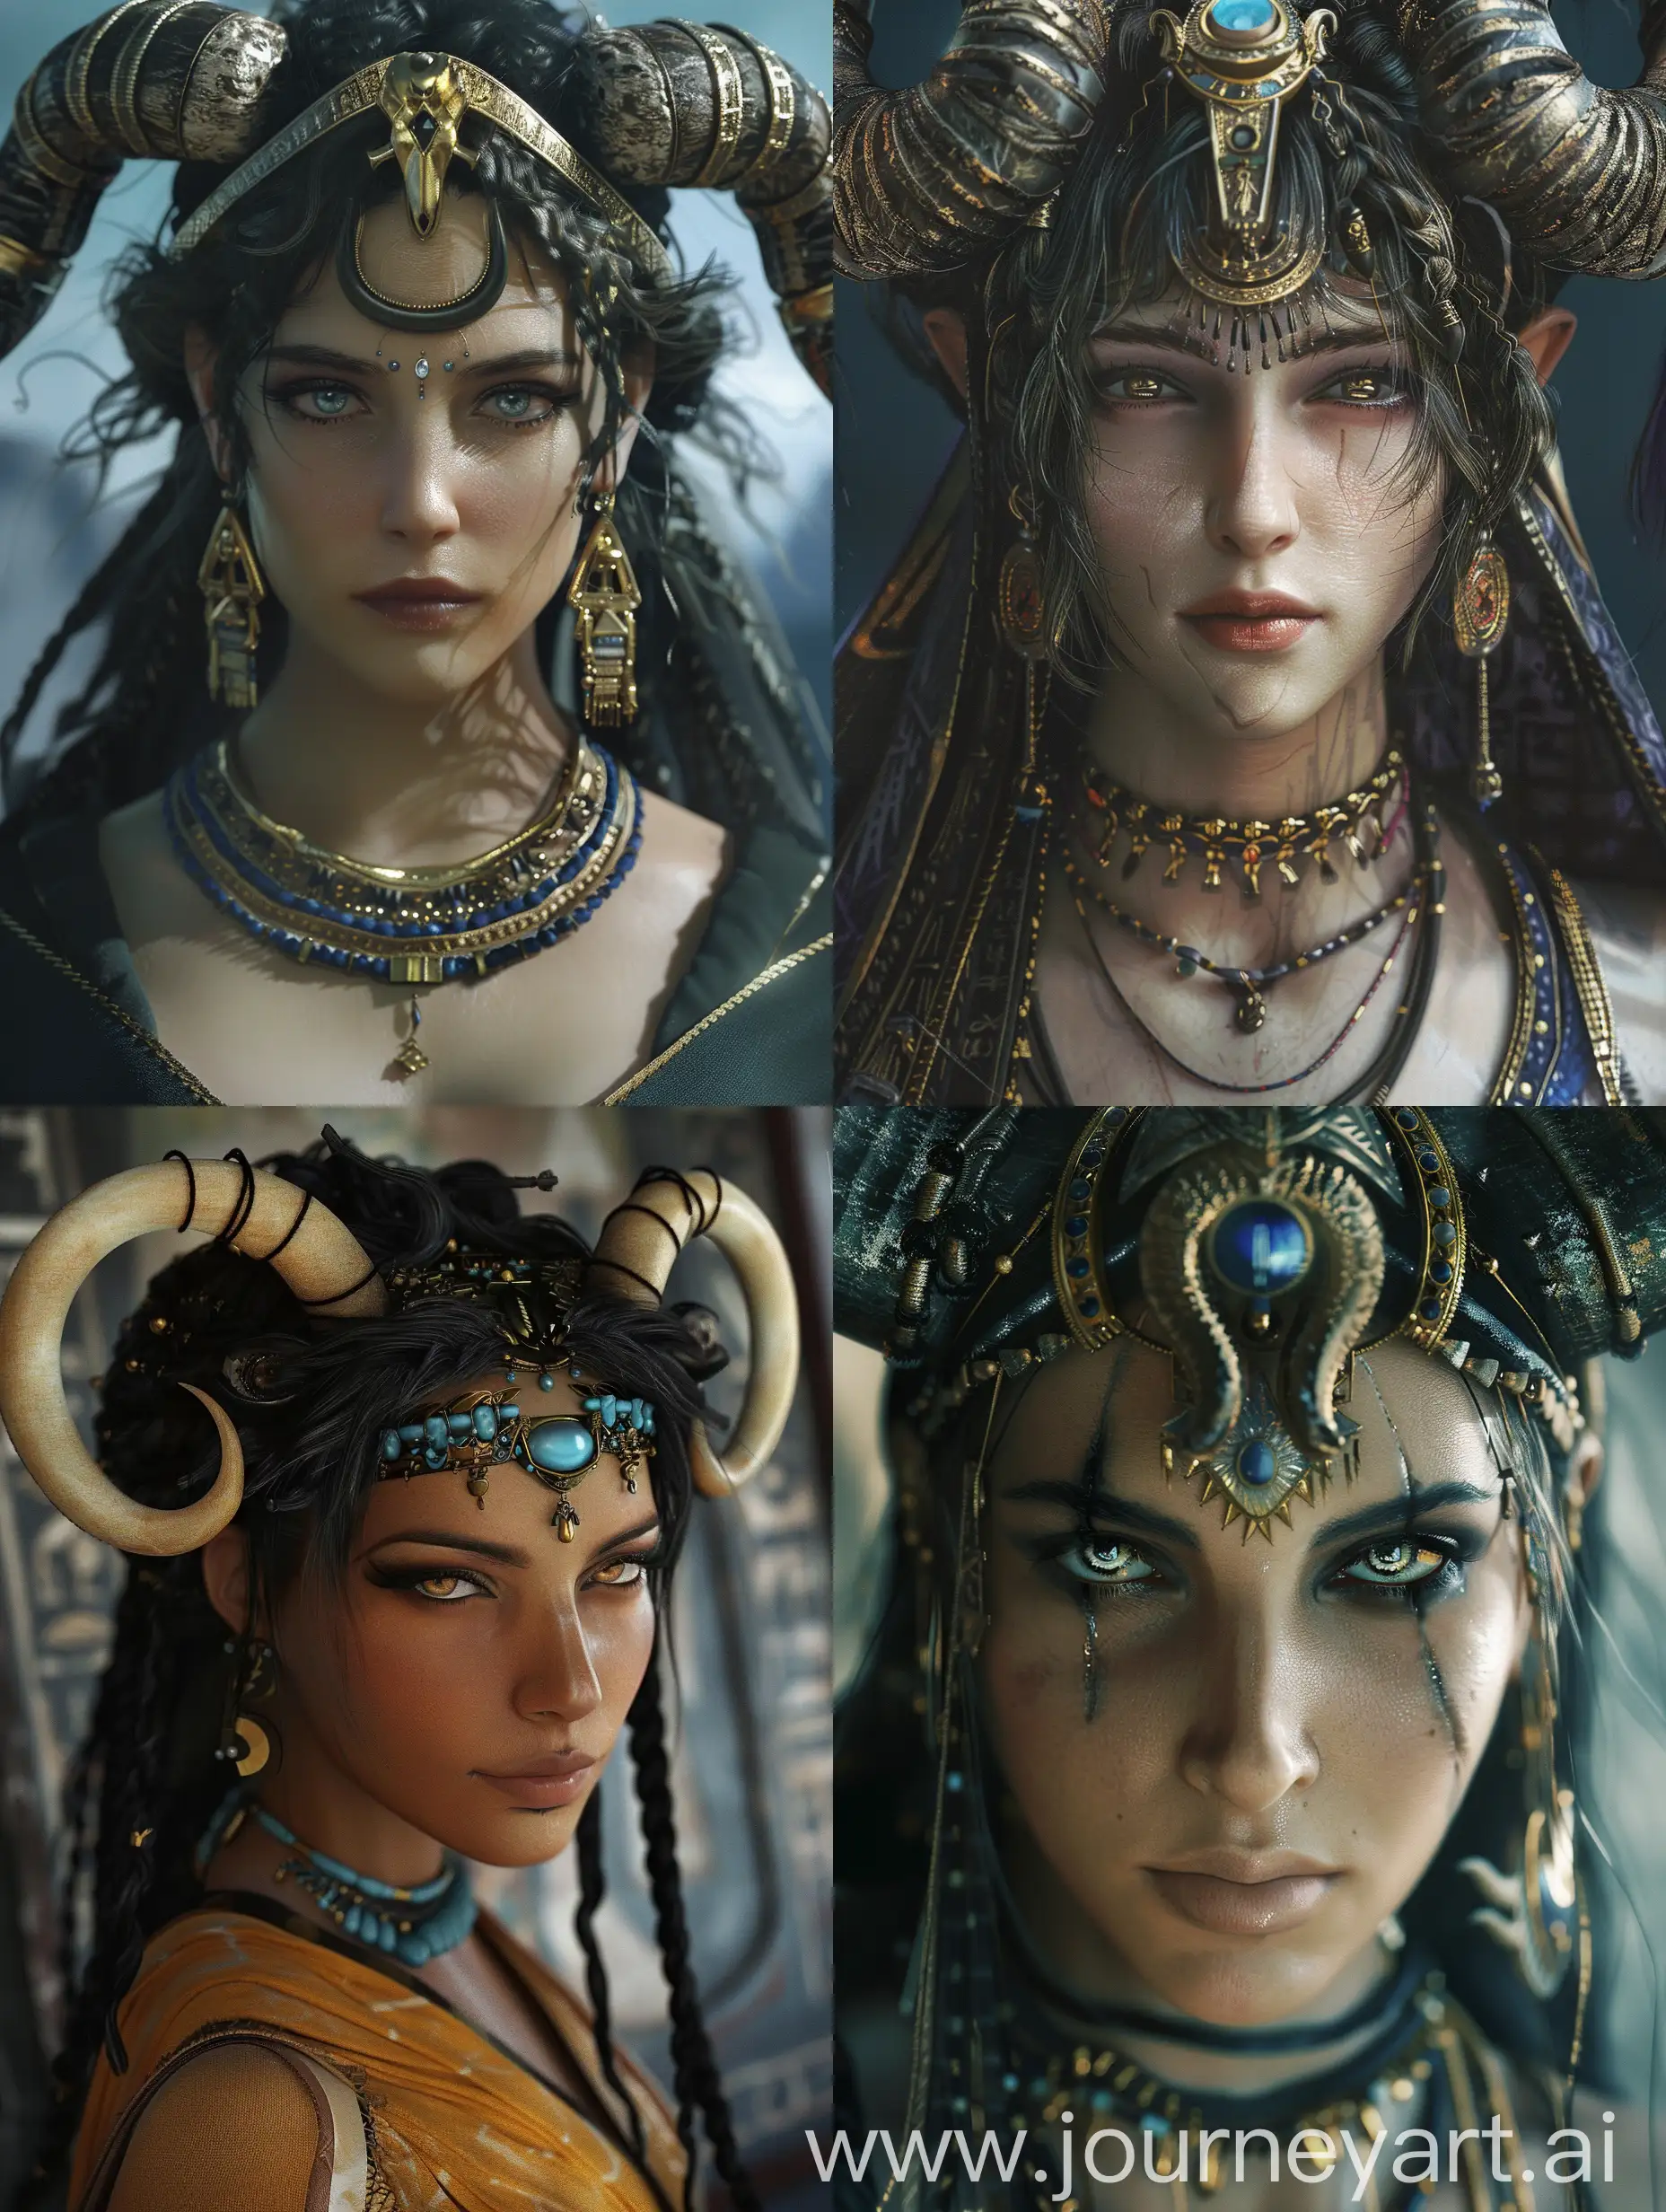 Hathor, the Egyptian god, the goddess of love and beauty, with cow horn decorations on her head, dark fantasy, final fantasy XV style